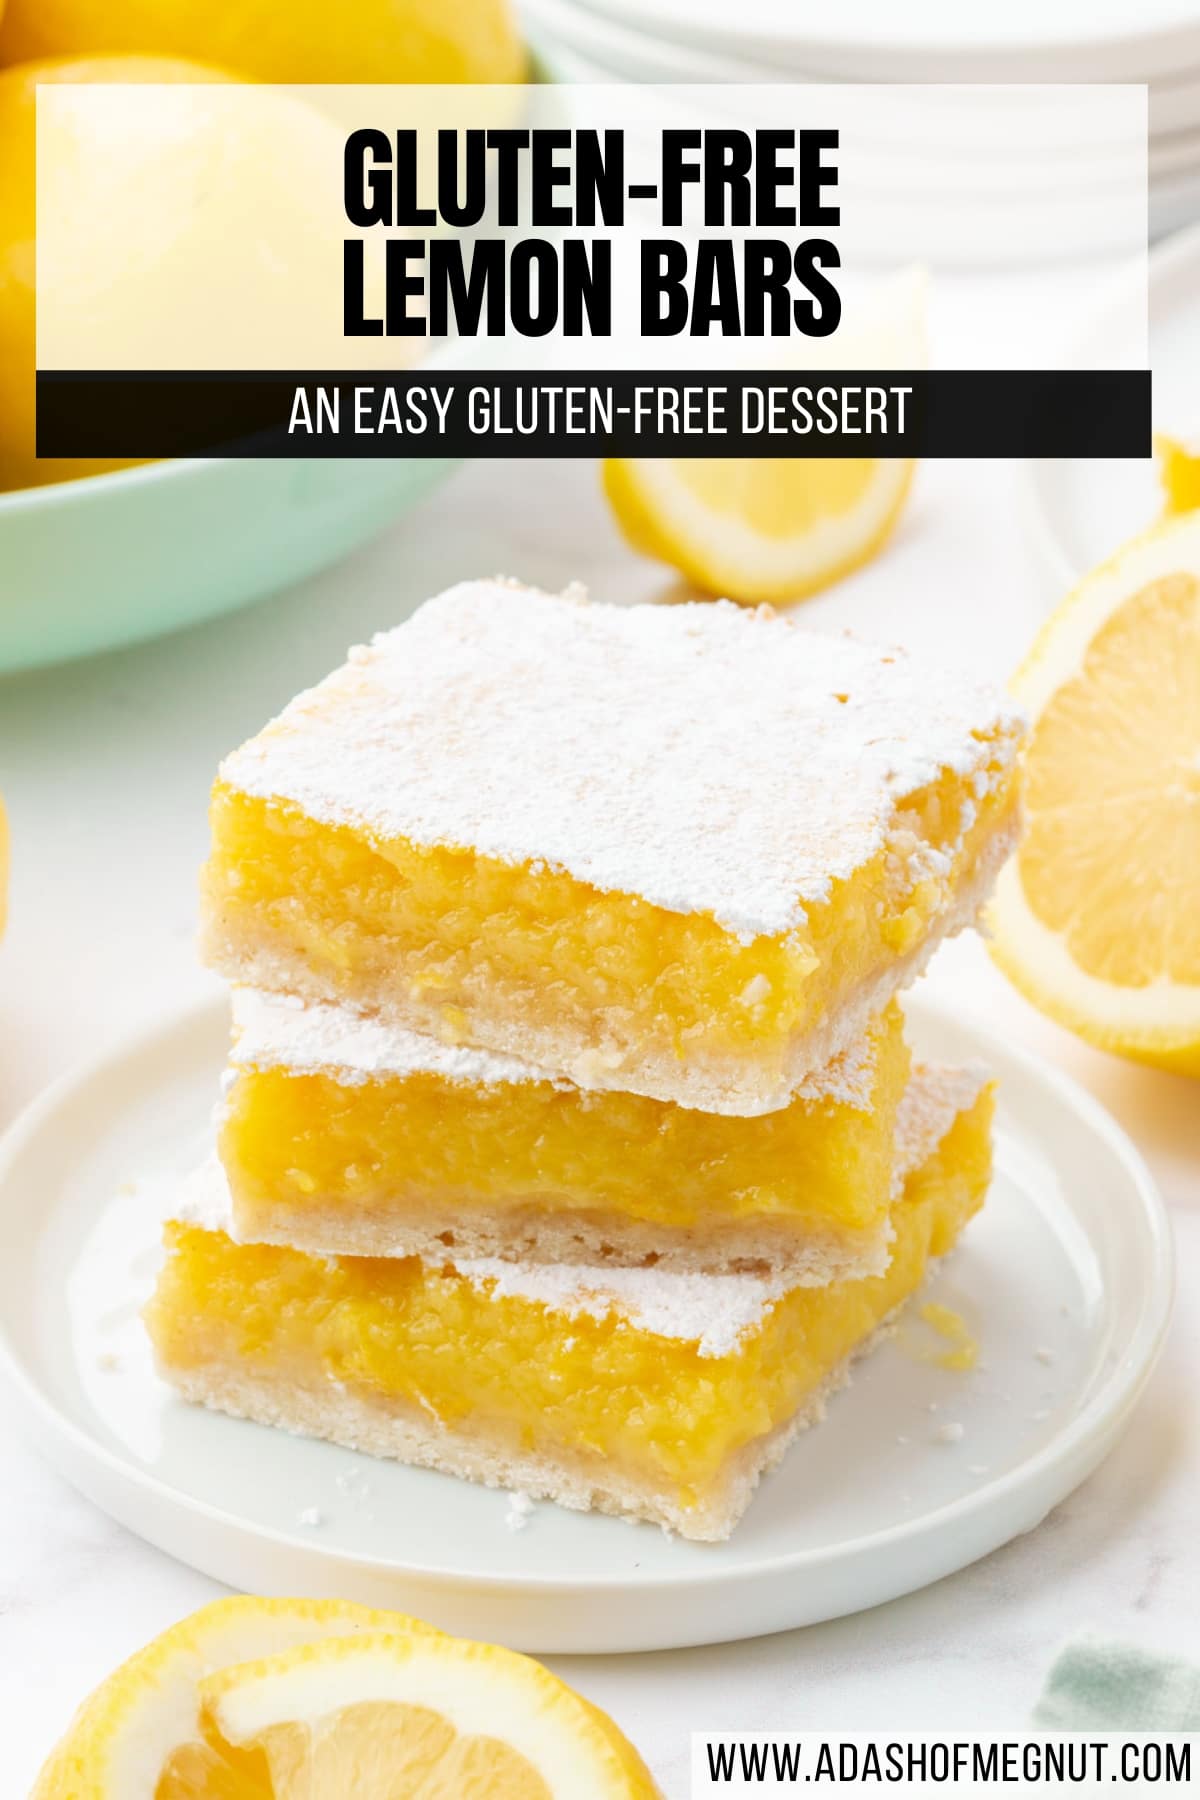 A stack of three gf lemon bars dusted with powdered sugar on a dessert plate with sliced lemons surrounding the plate.